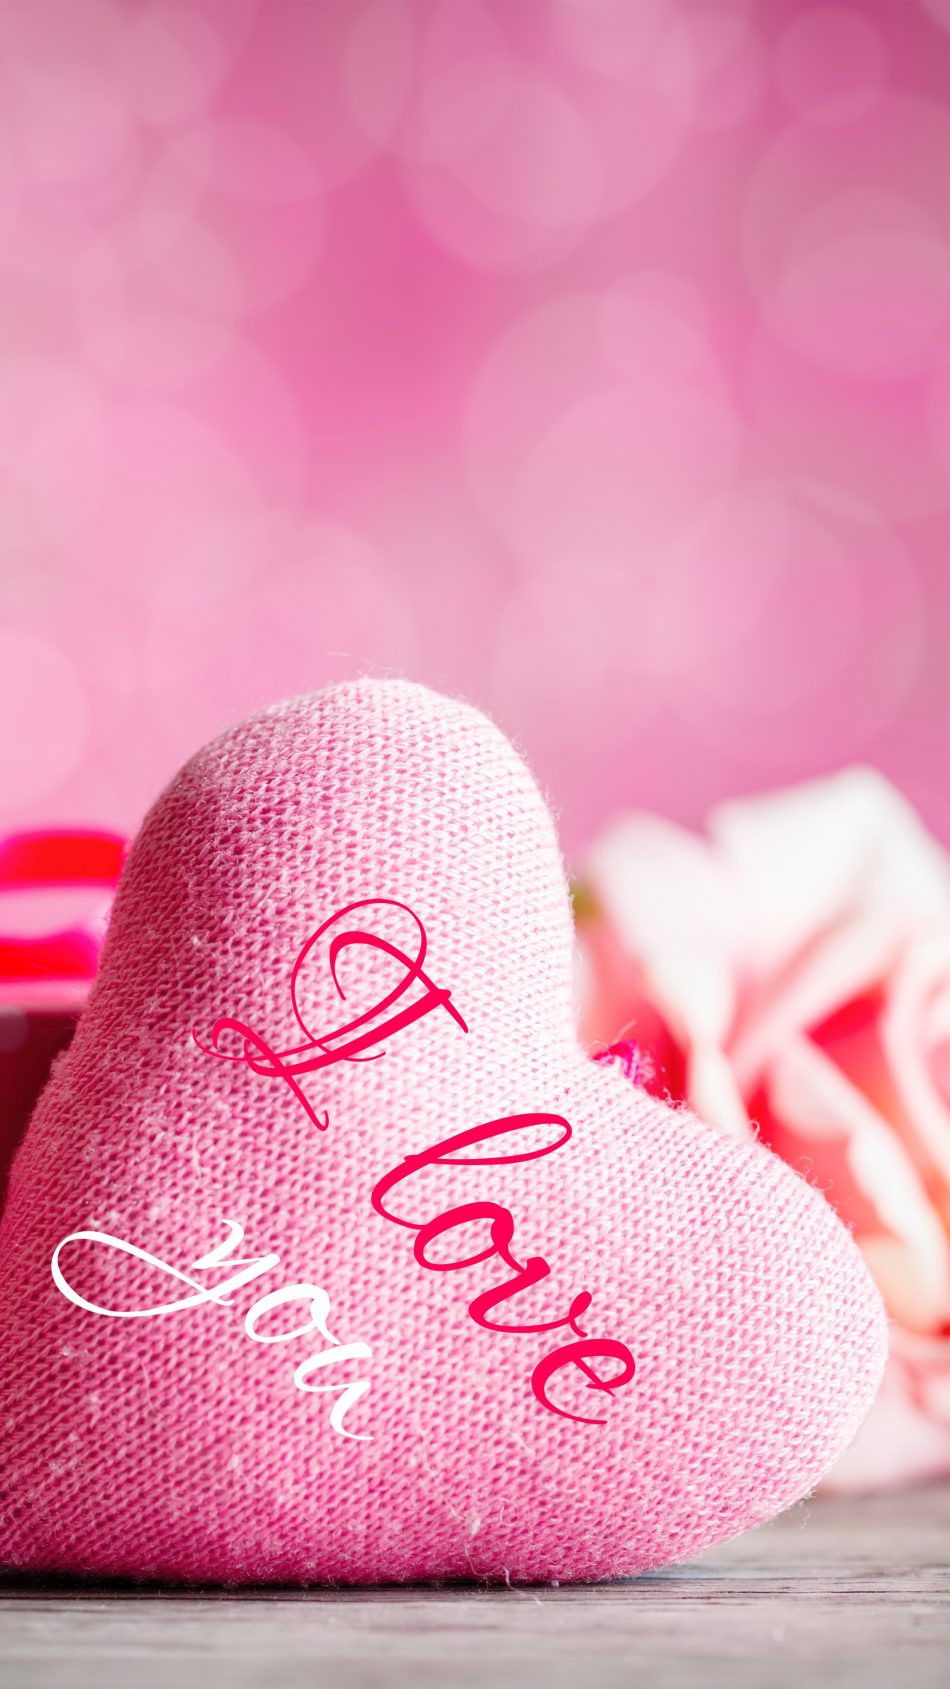 I Love You With Pink Love Heart HD I Love You Wallpaper